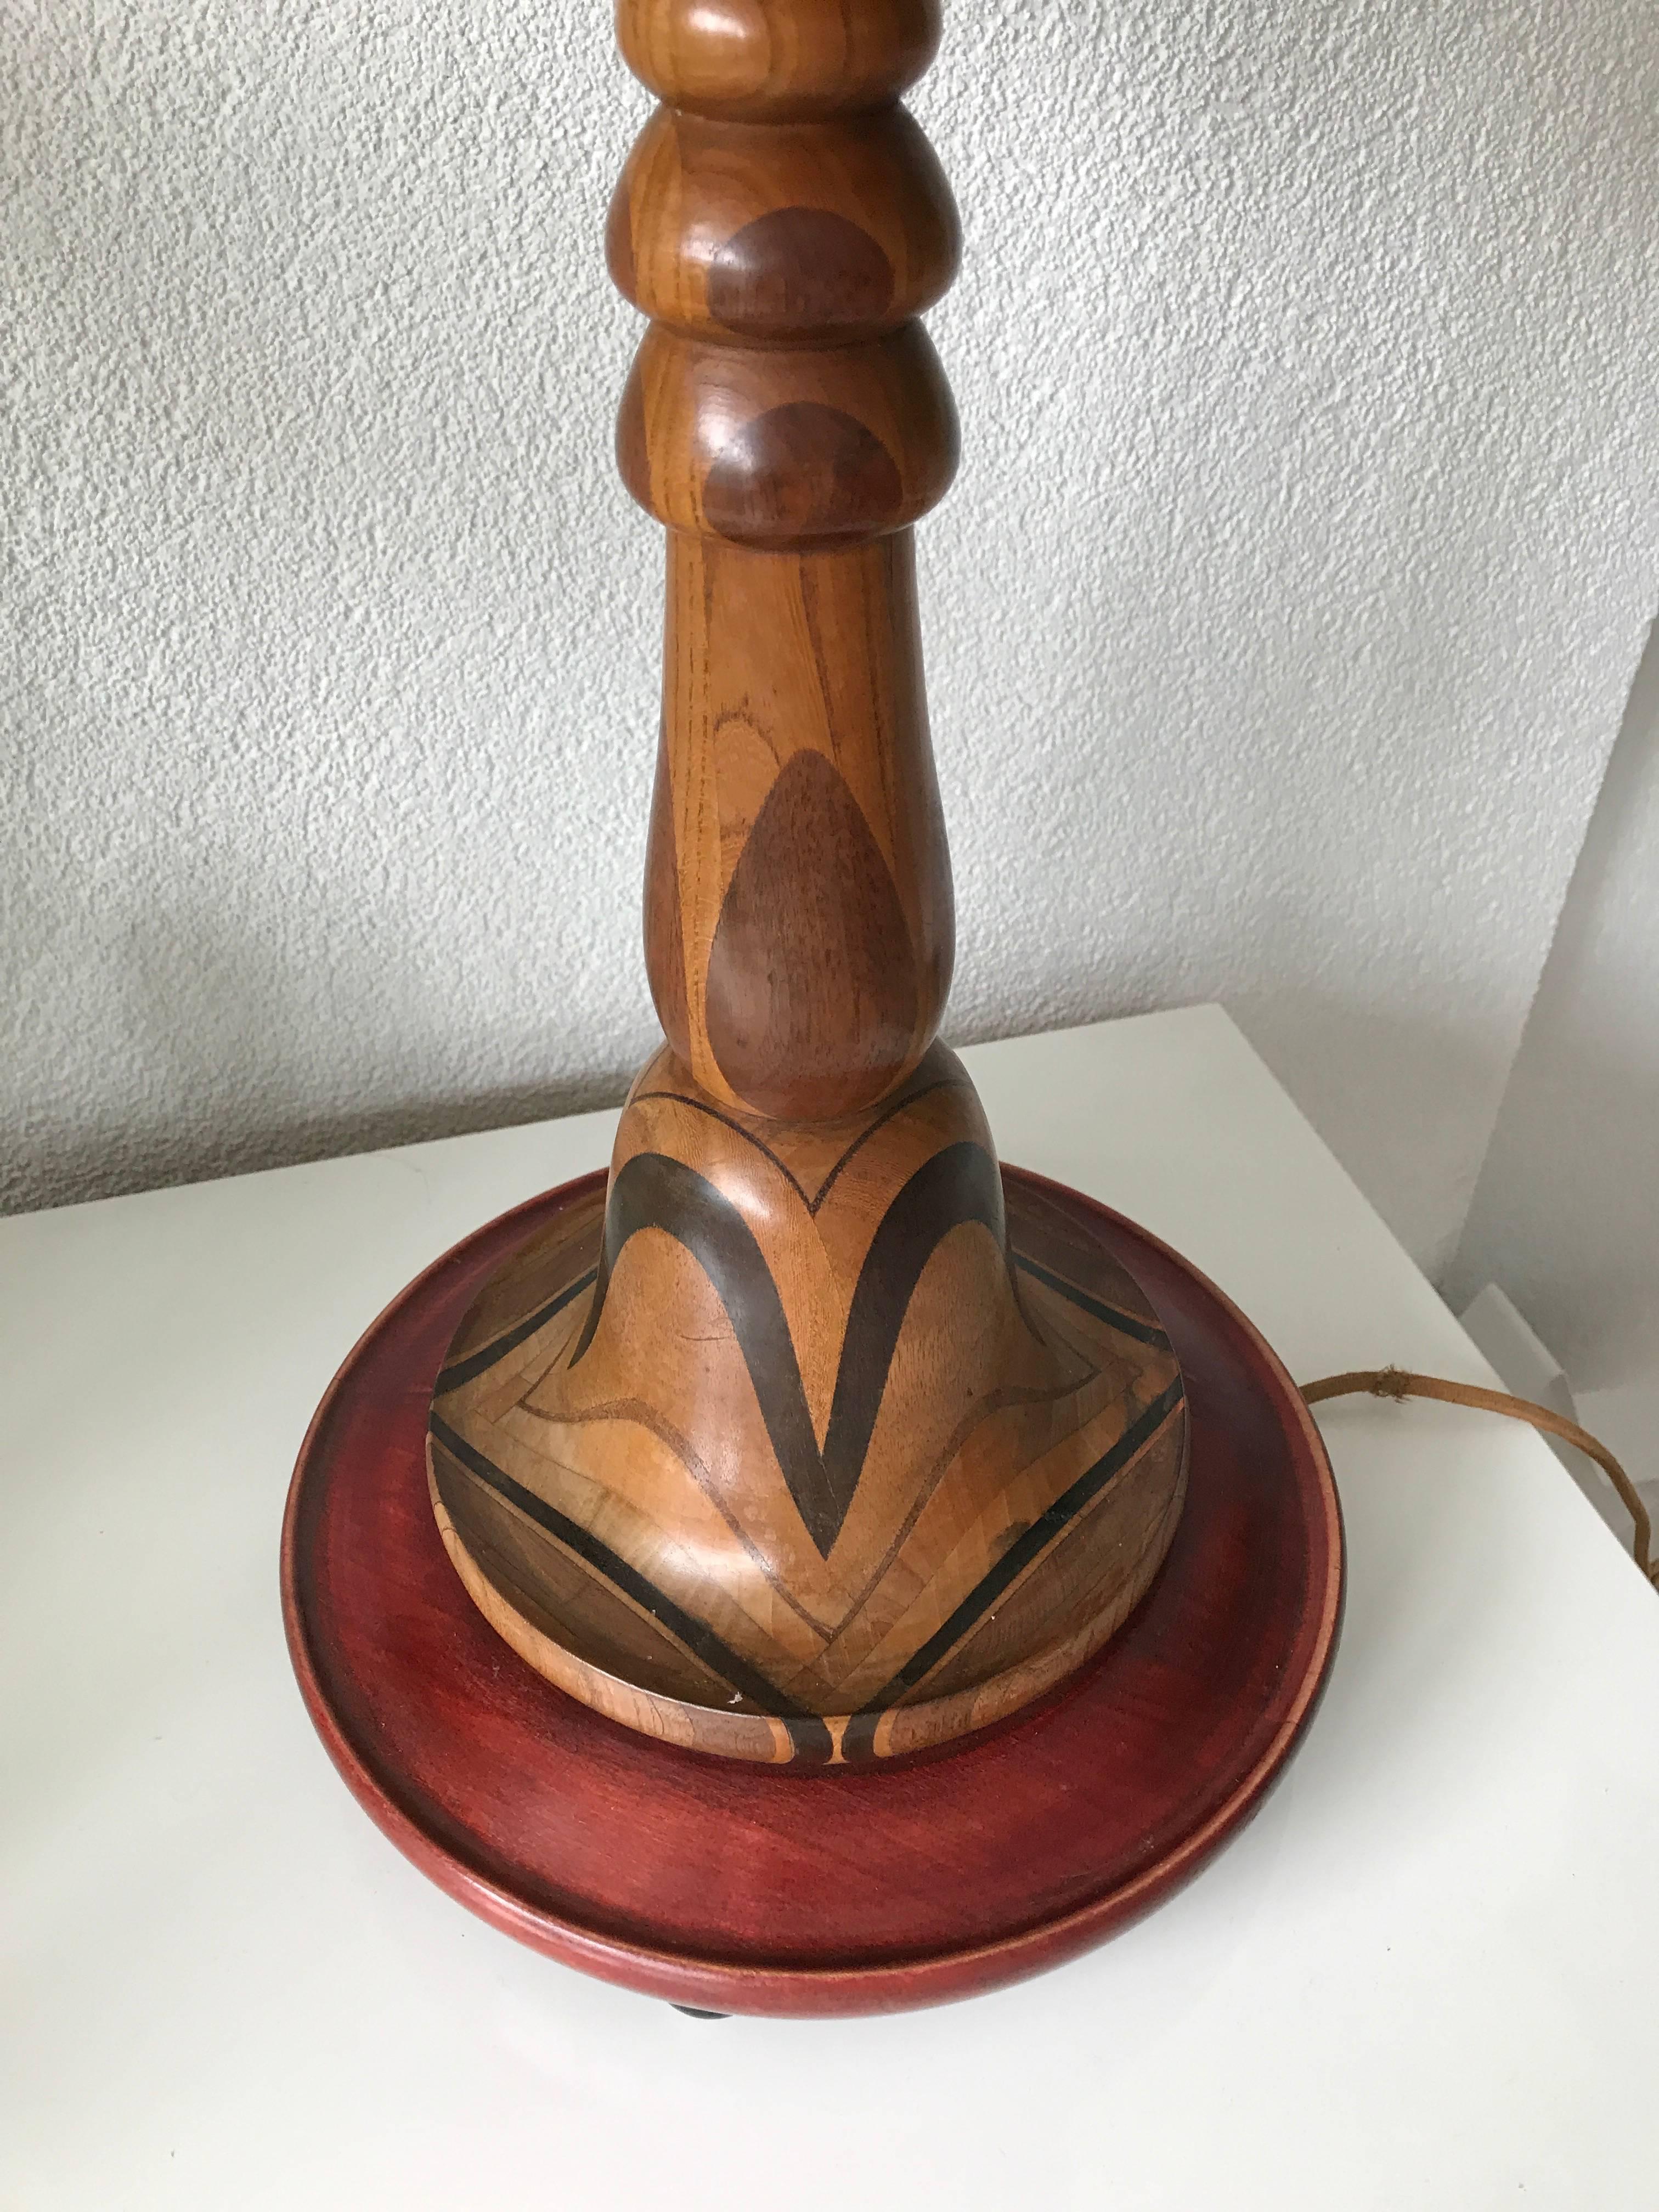 Rare and Hand-Crafted Art Deco Desk or Table Lamp with Stunning Wood Motifs For Sale 1